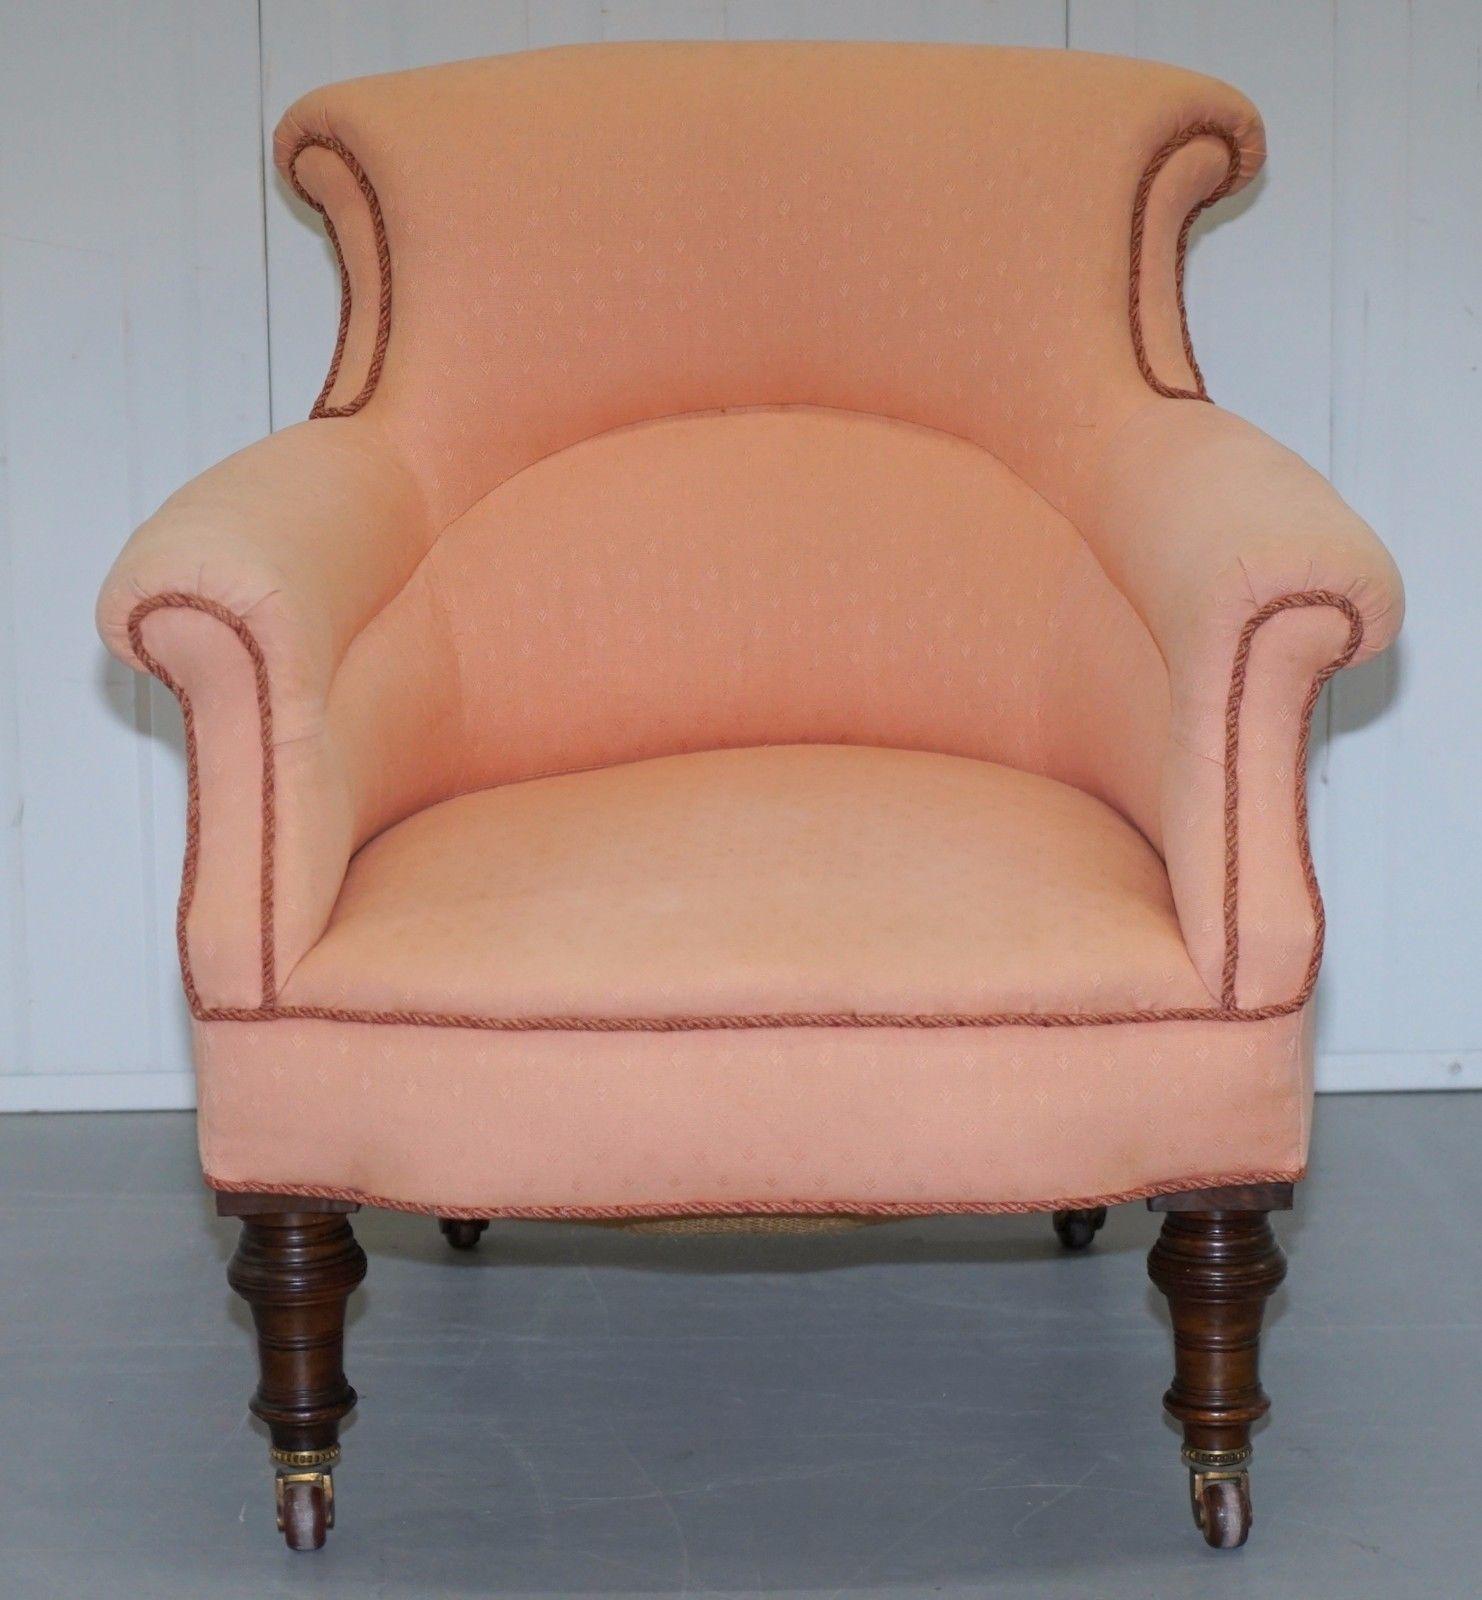 We are delighted to offer for auction this lovely original Druce & Co LTD of Baker Street London Victorian mahogany small tub armchair with samon pink upholstery.

All castors are original porcelain and fully stand Druce & Co London, this is a